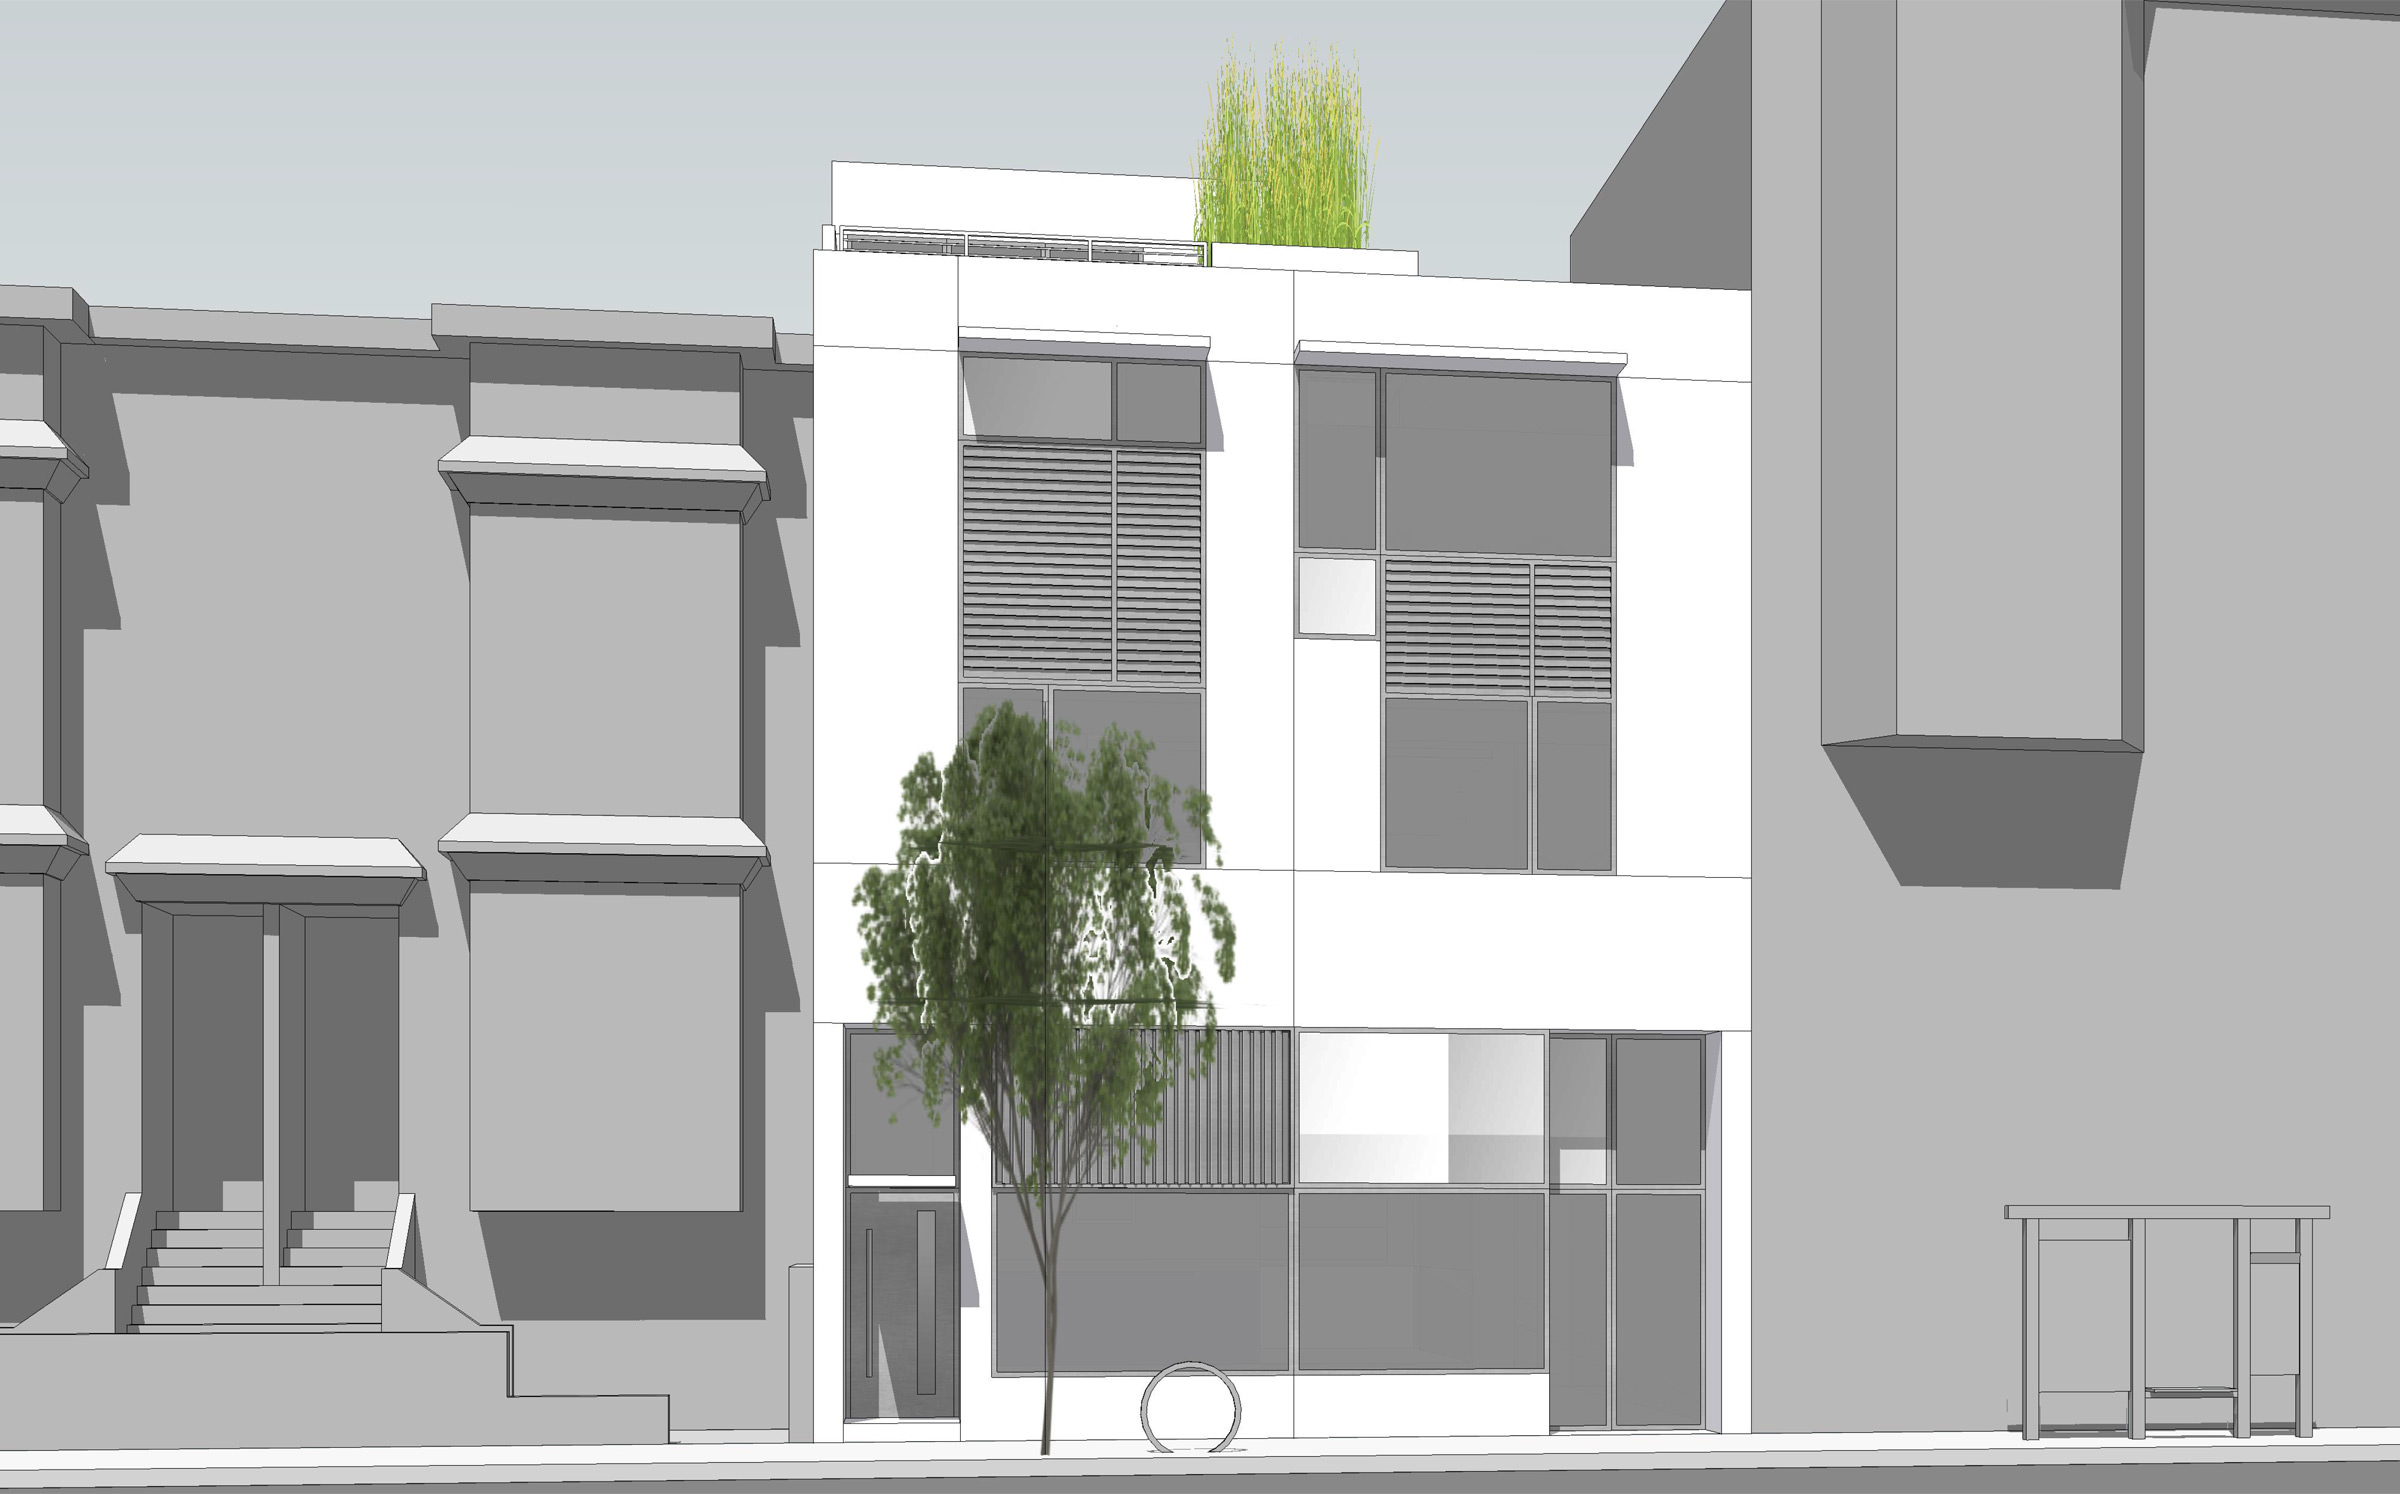 San Francisco Mission District 3 Unit Residential with Retail and Penthouse